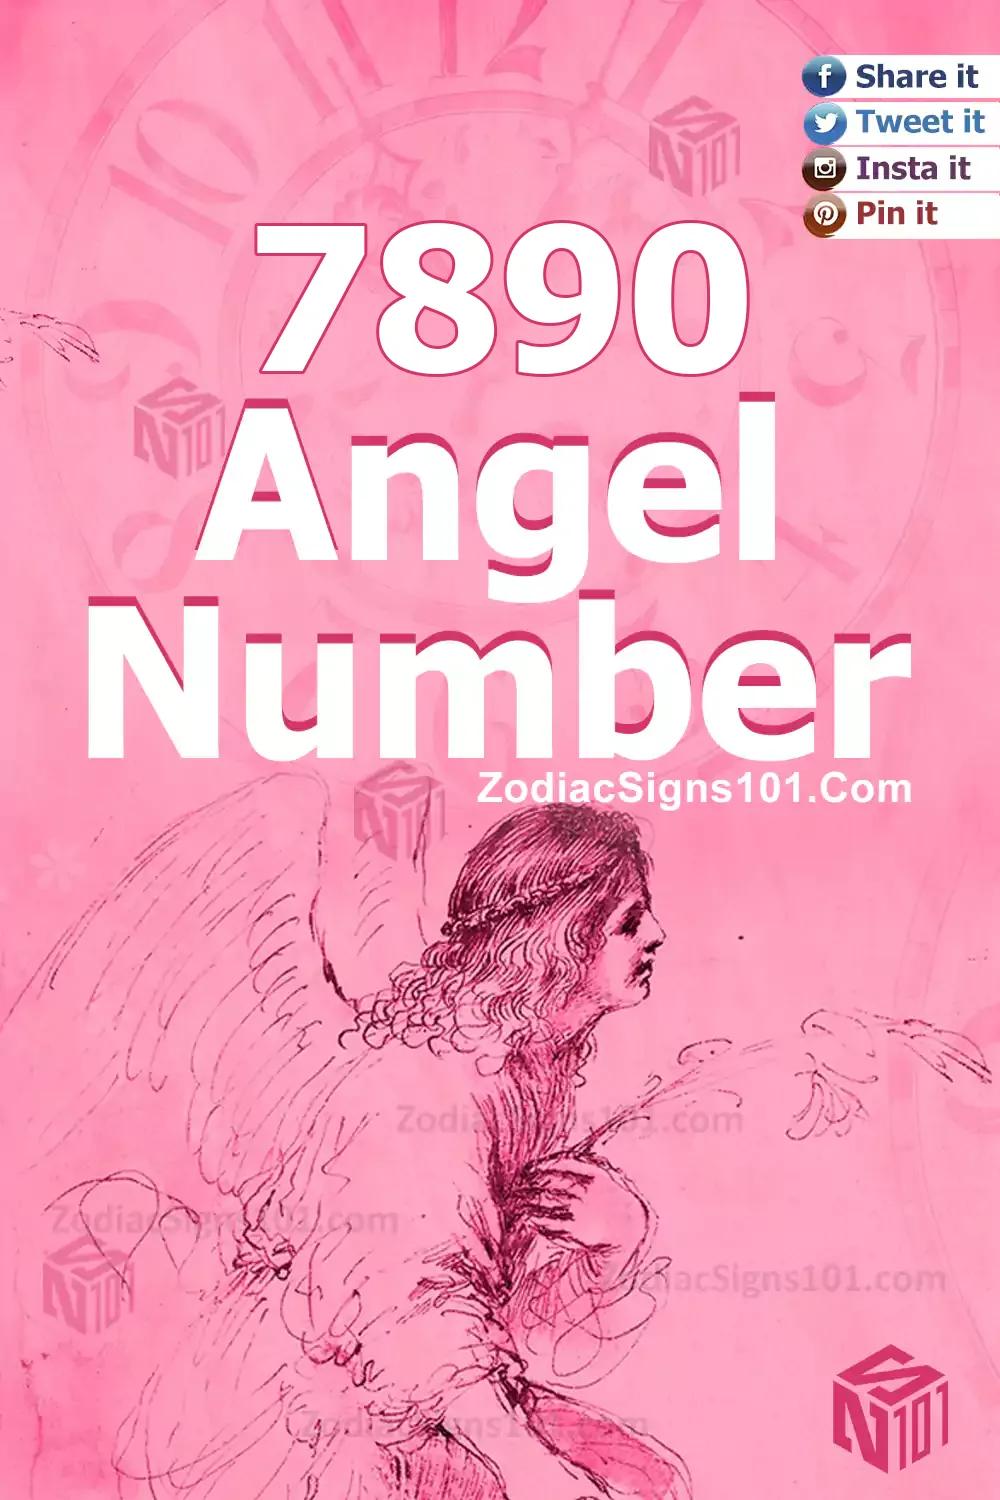 7890 Angel Number Meaning